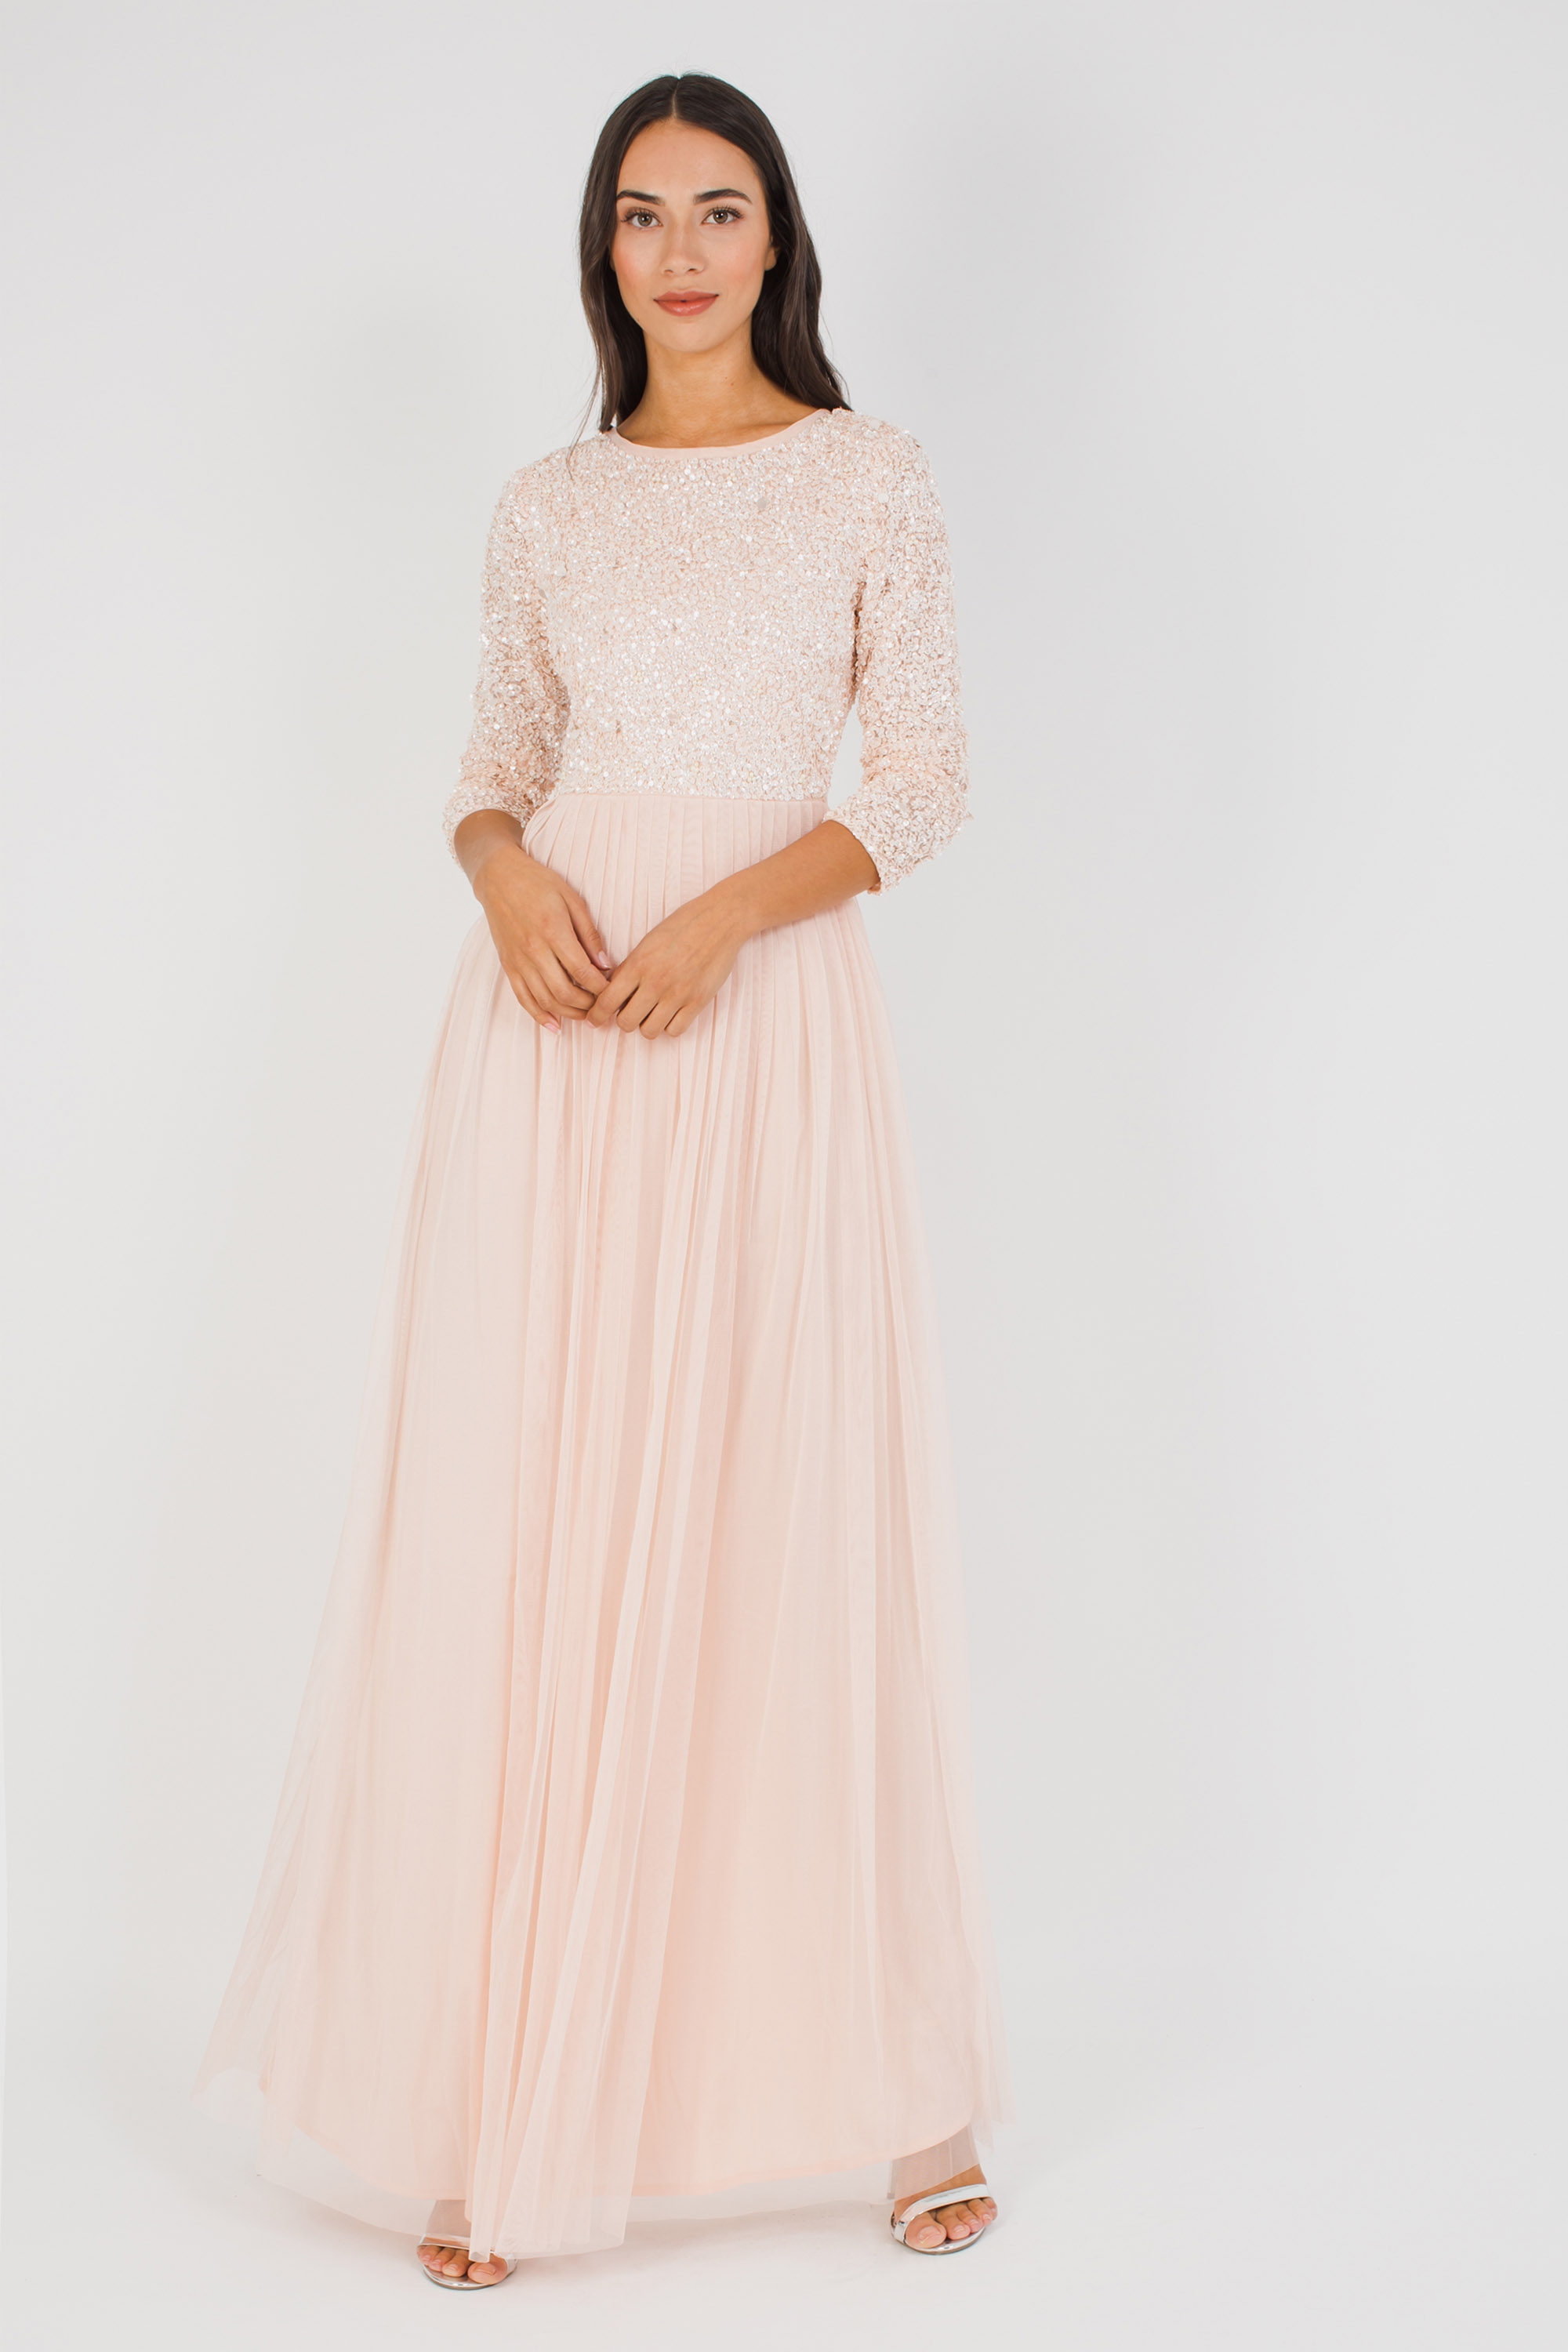 Lace & Beads Picasso 3/4 Sleeved Pink Embellished Maxi Dress